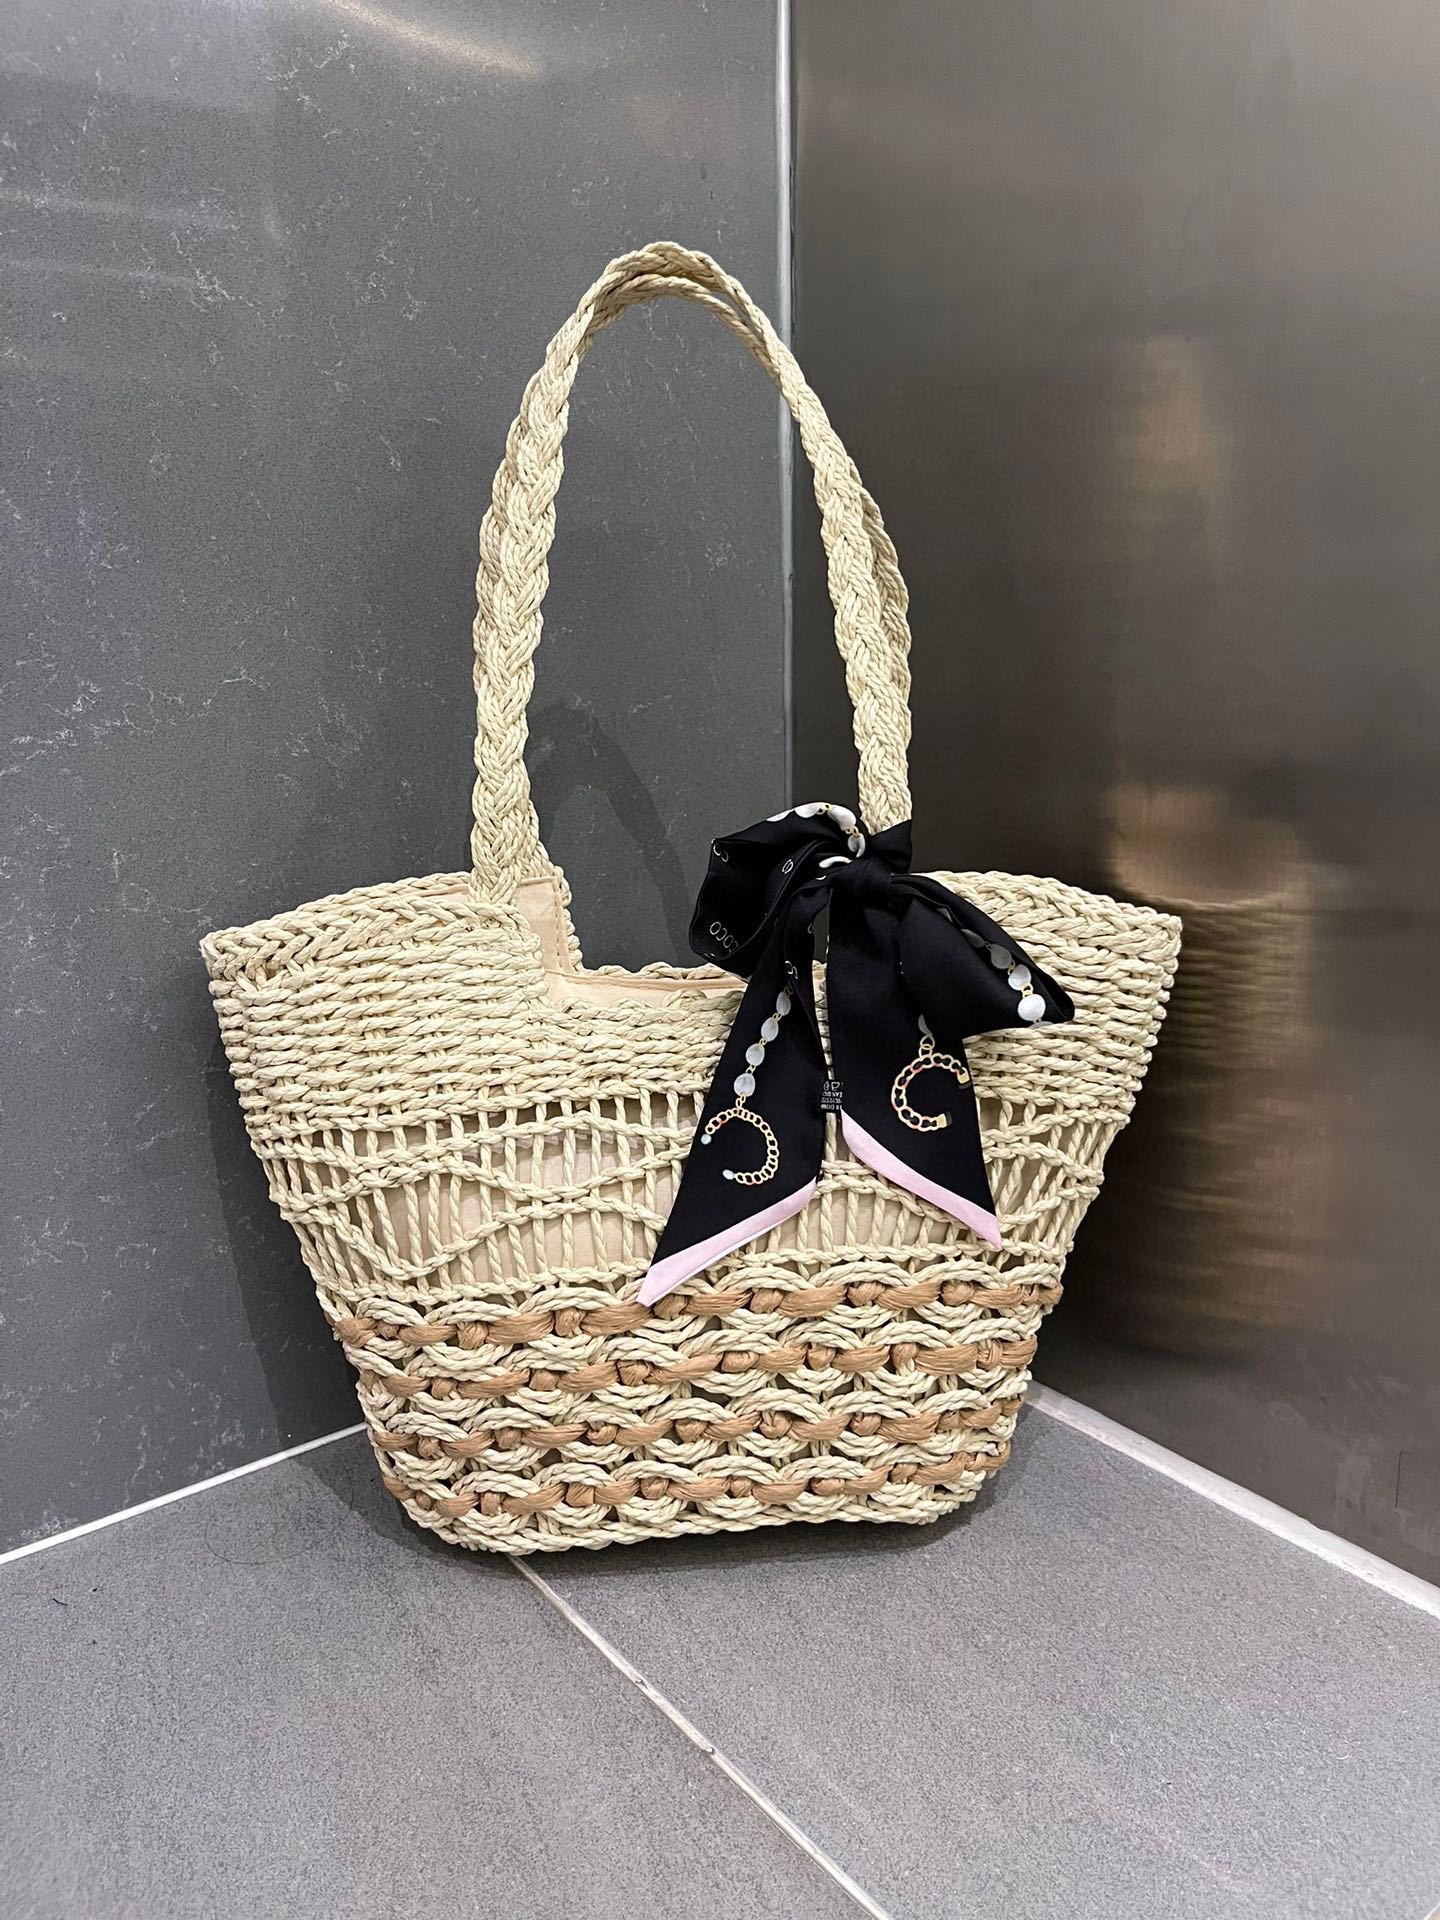 Chanel Bags Handbags Straw Woven Summer Collection